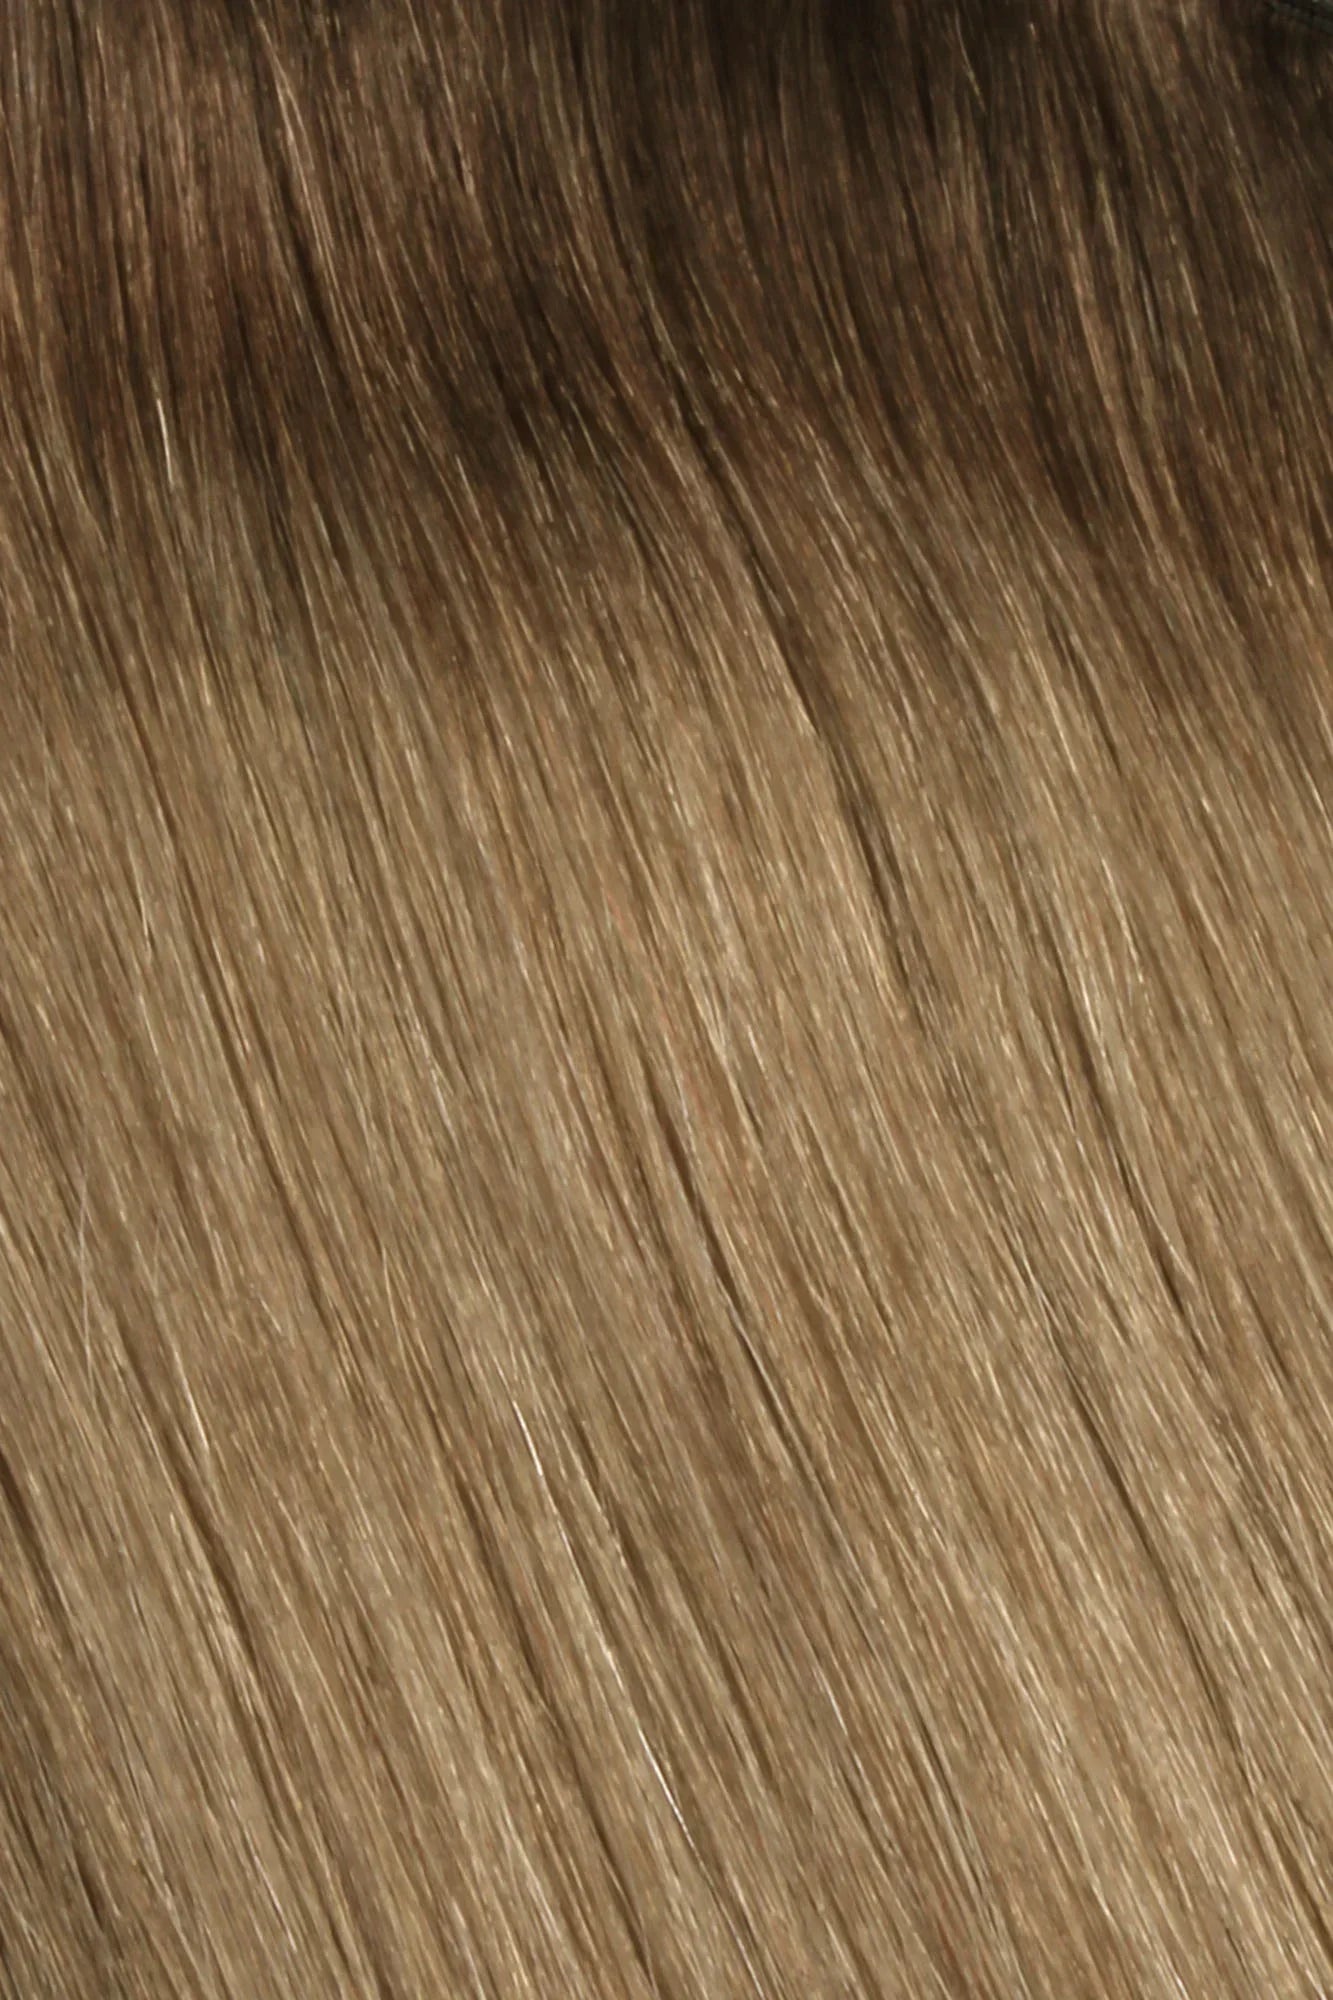 SWAY Nano Bond extensions  16 Inches